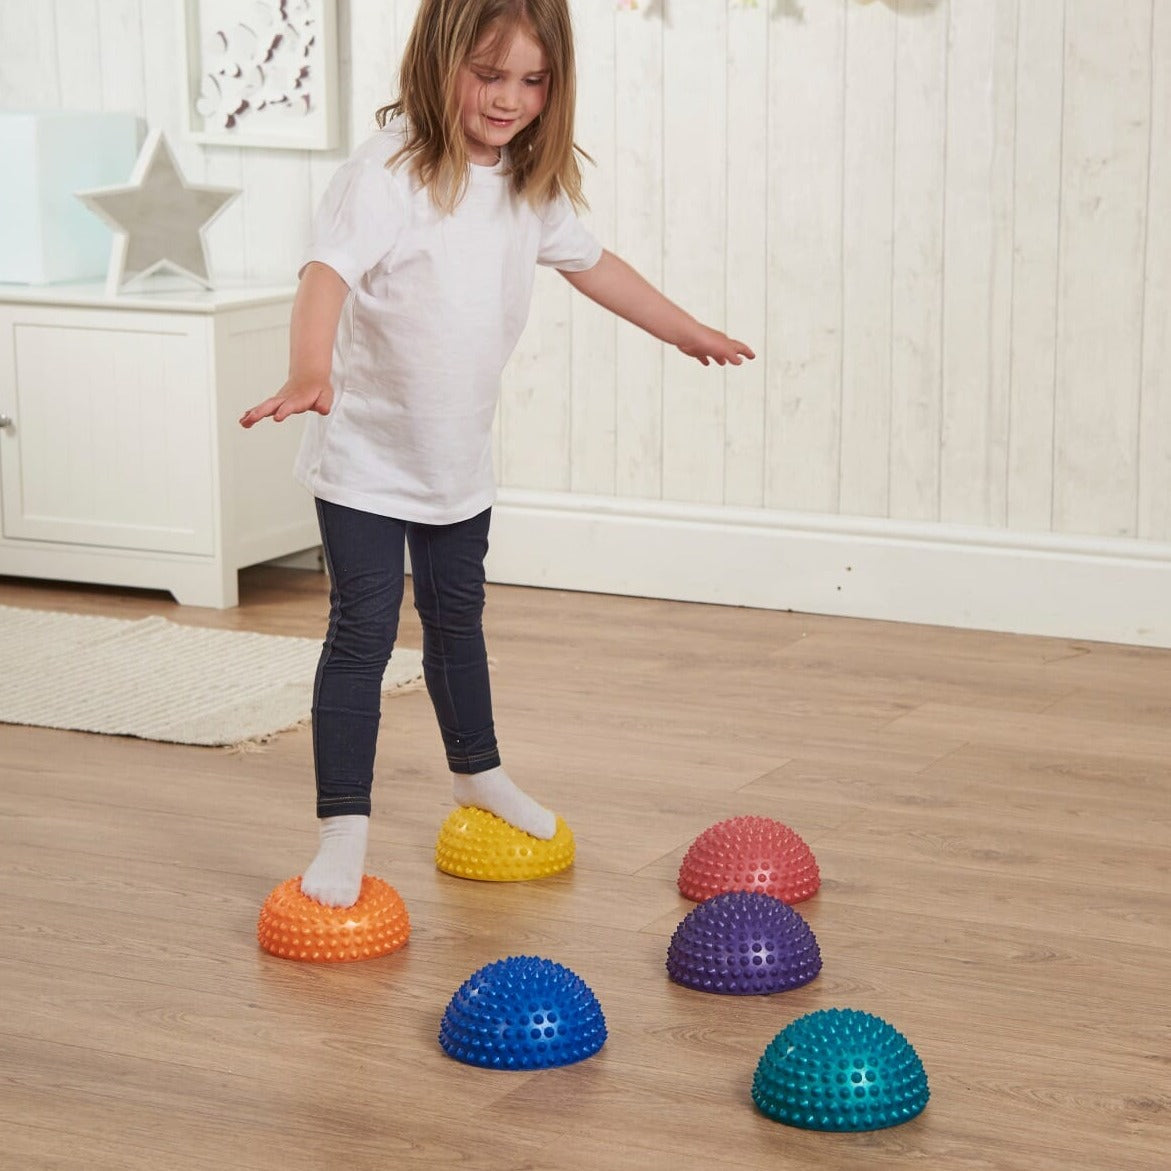 Abili Sensory Stepping Stones, The Sensory Stepping stone Balance Pods are the ideal tool for proprioception, reducing tactile defensiveness, and coordination therapy. The Sensory Stepping Stones are supplied as a pack of 6,this creates endless possibilities to aid development skills such as balance,gross motor skills etc. These Balance Sensory Stepping Stones have a bumpy surface that provide feet with input as a child walks barefoot. The Balance Pods can also be weighted down with water. The set contains 